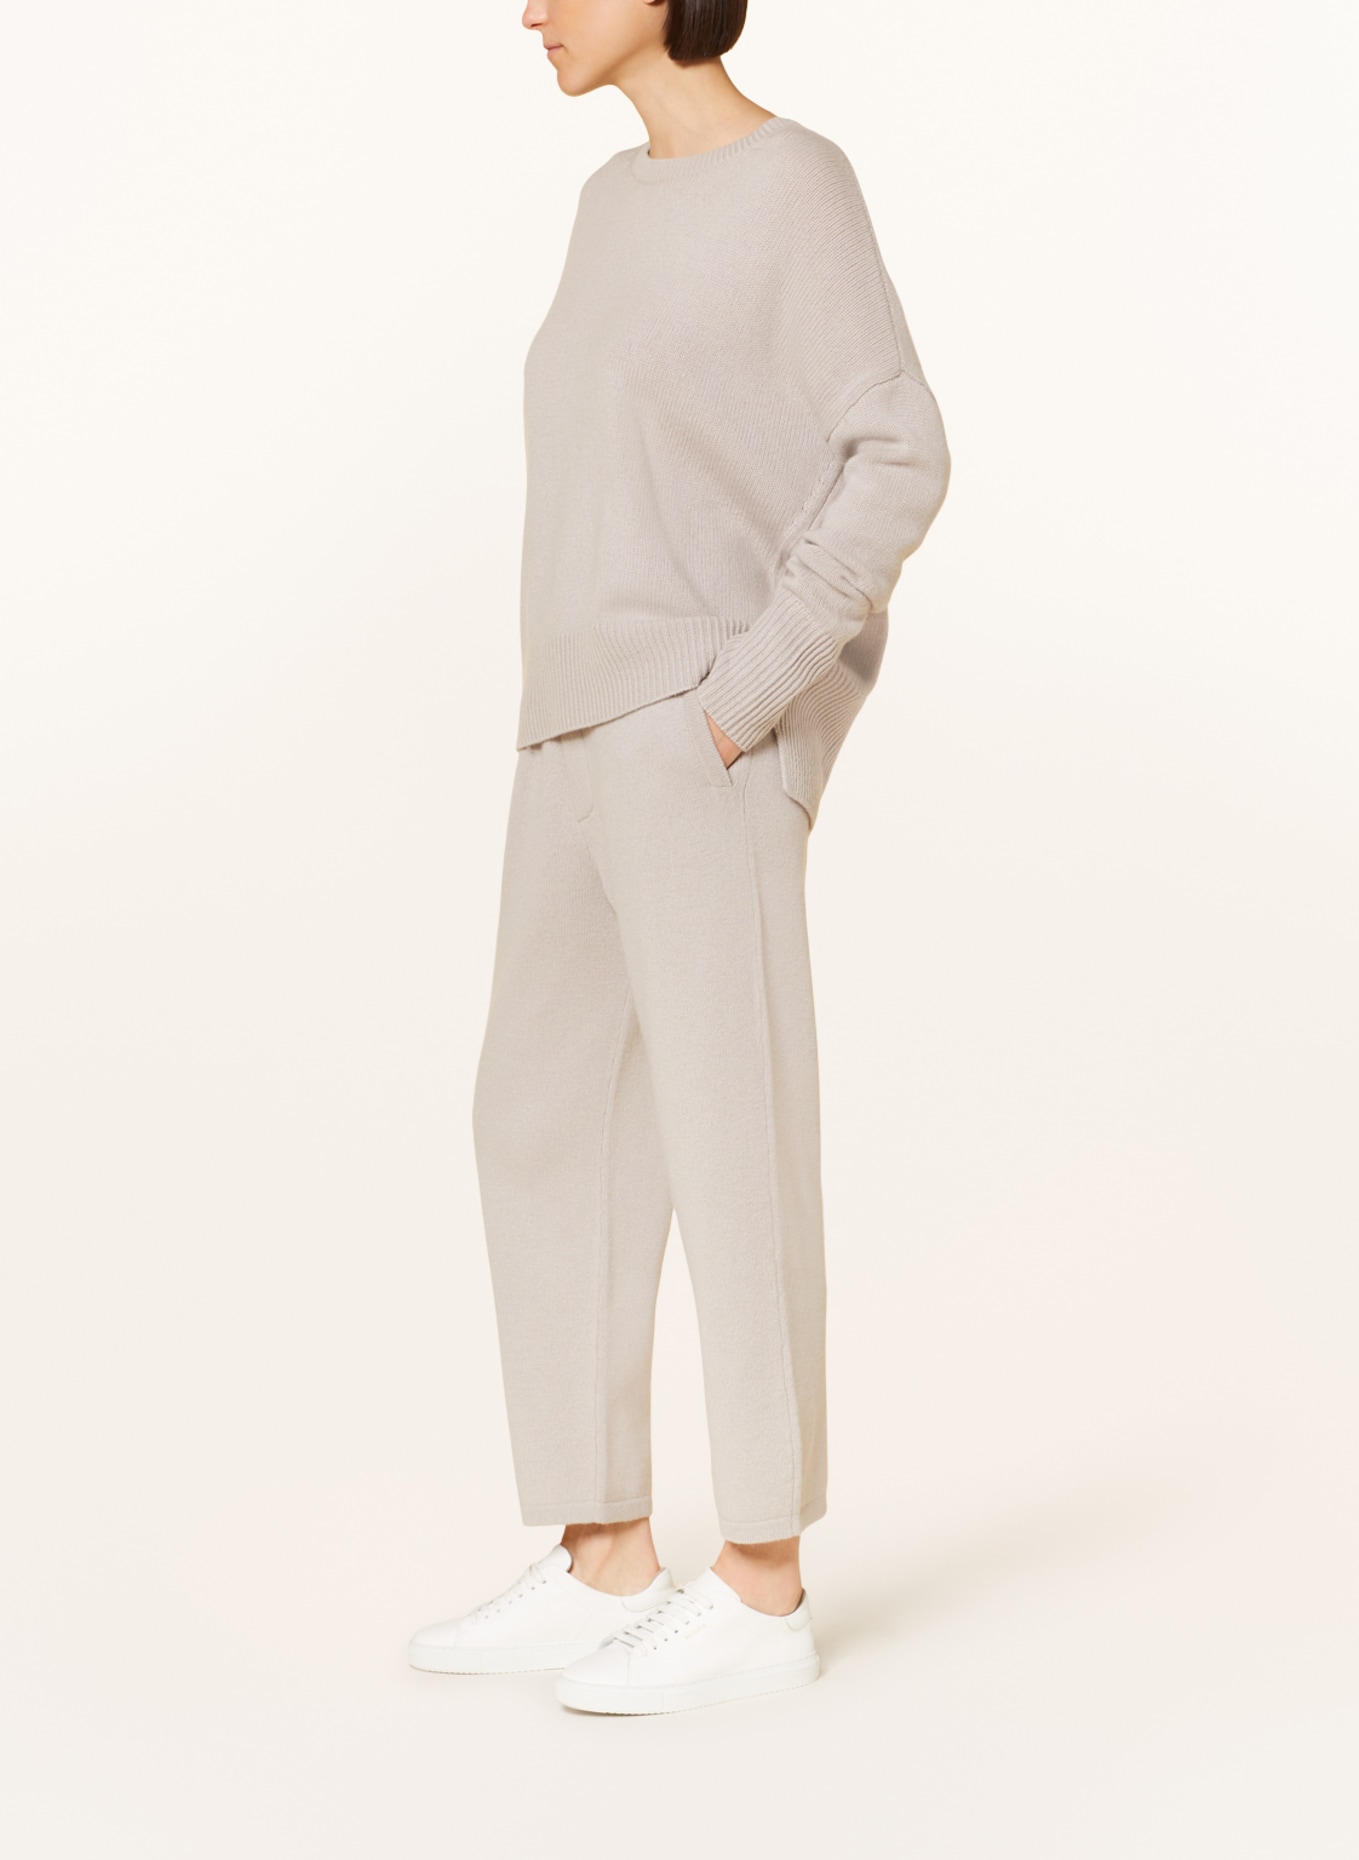 LISA YANG Knit trousers SUNDAY in jogger style in cashmere, Color: LIGHT GRAY (Image 4)